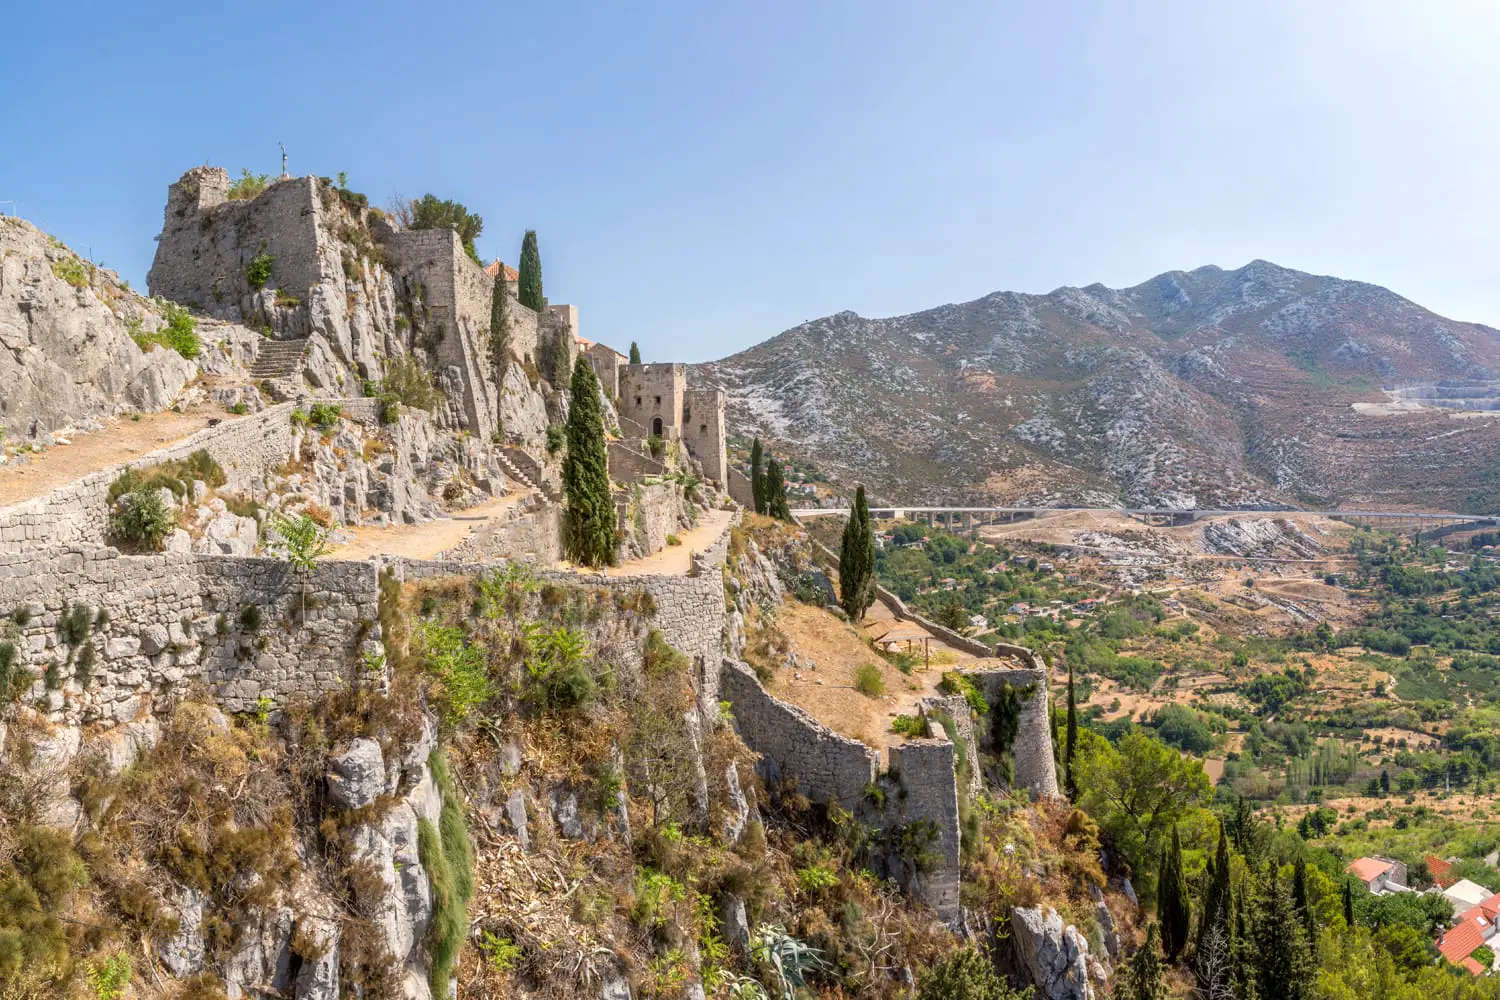 Ruins of the medieval fortress of Klis, Croatia